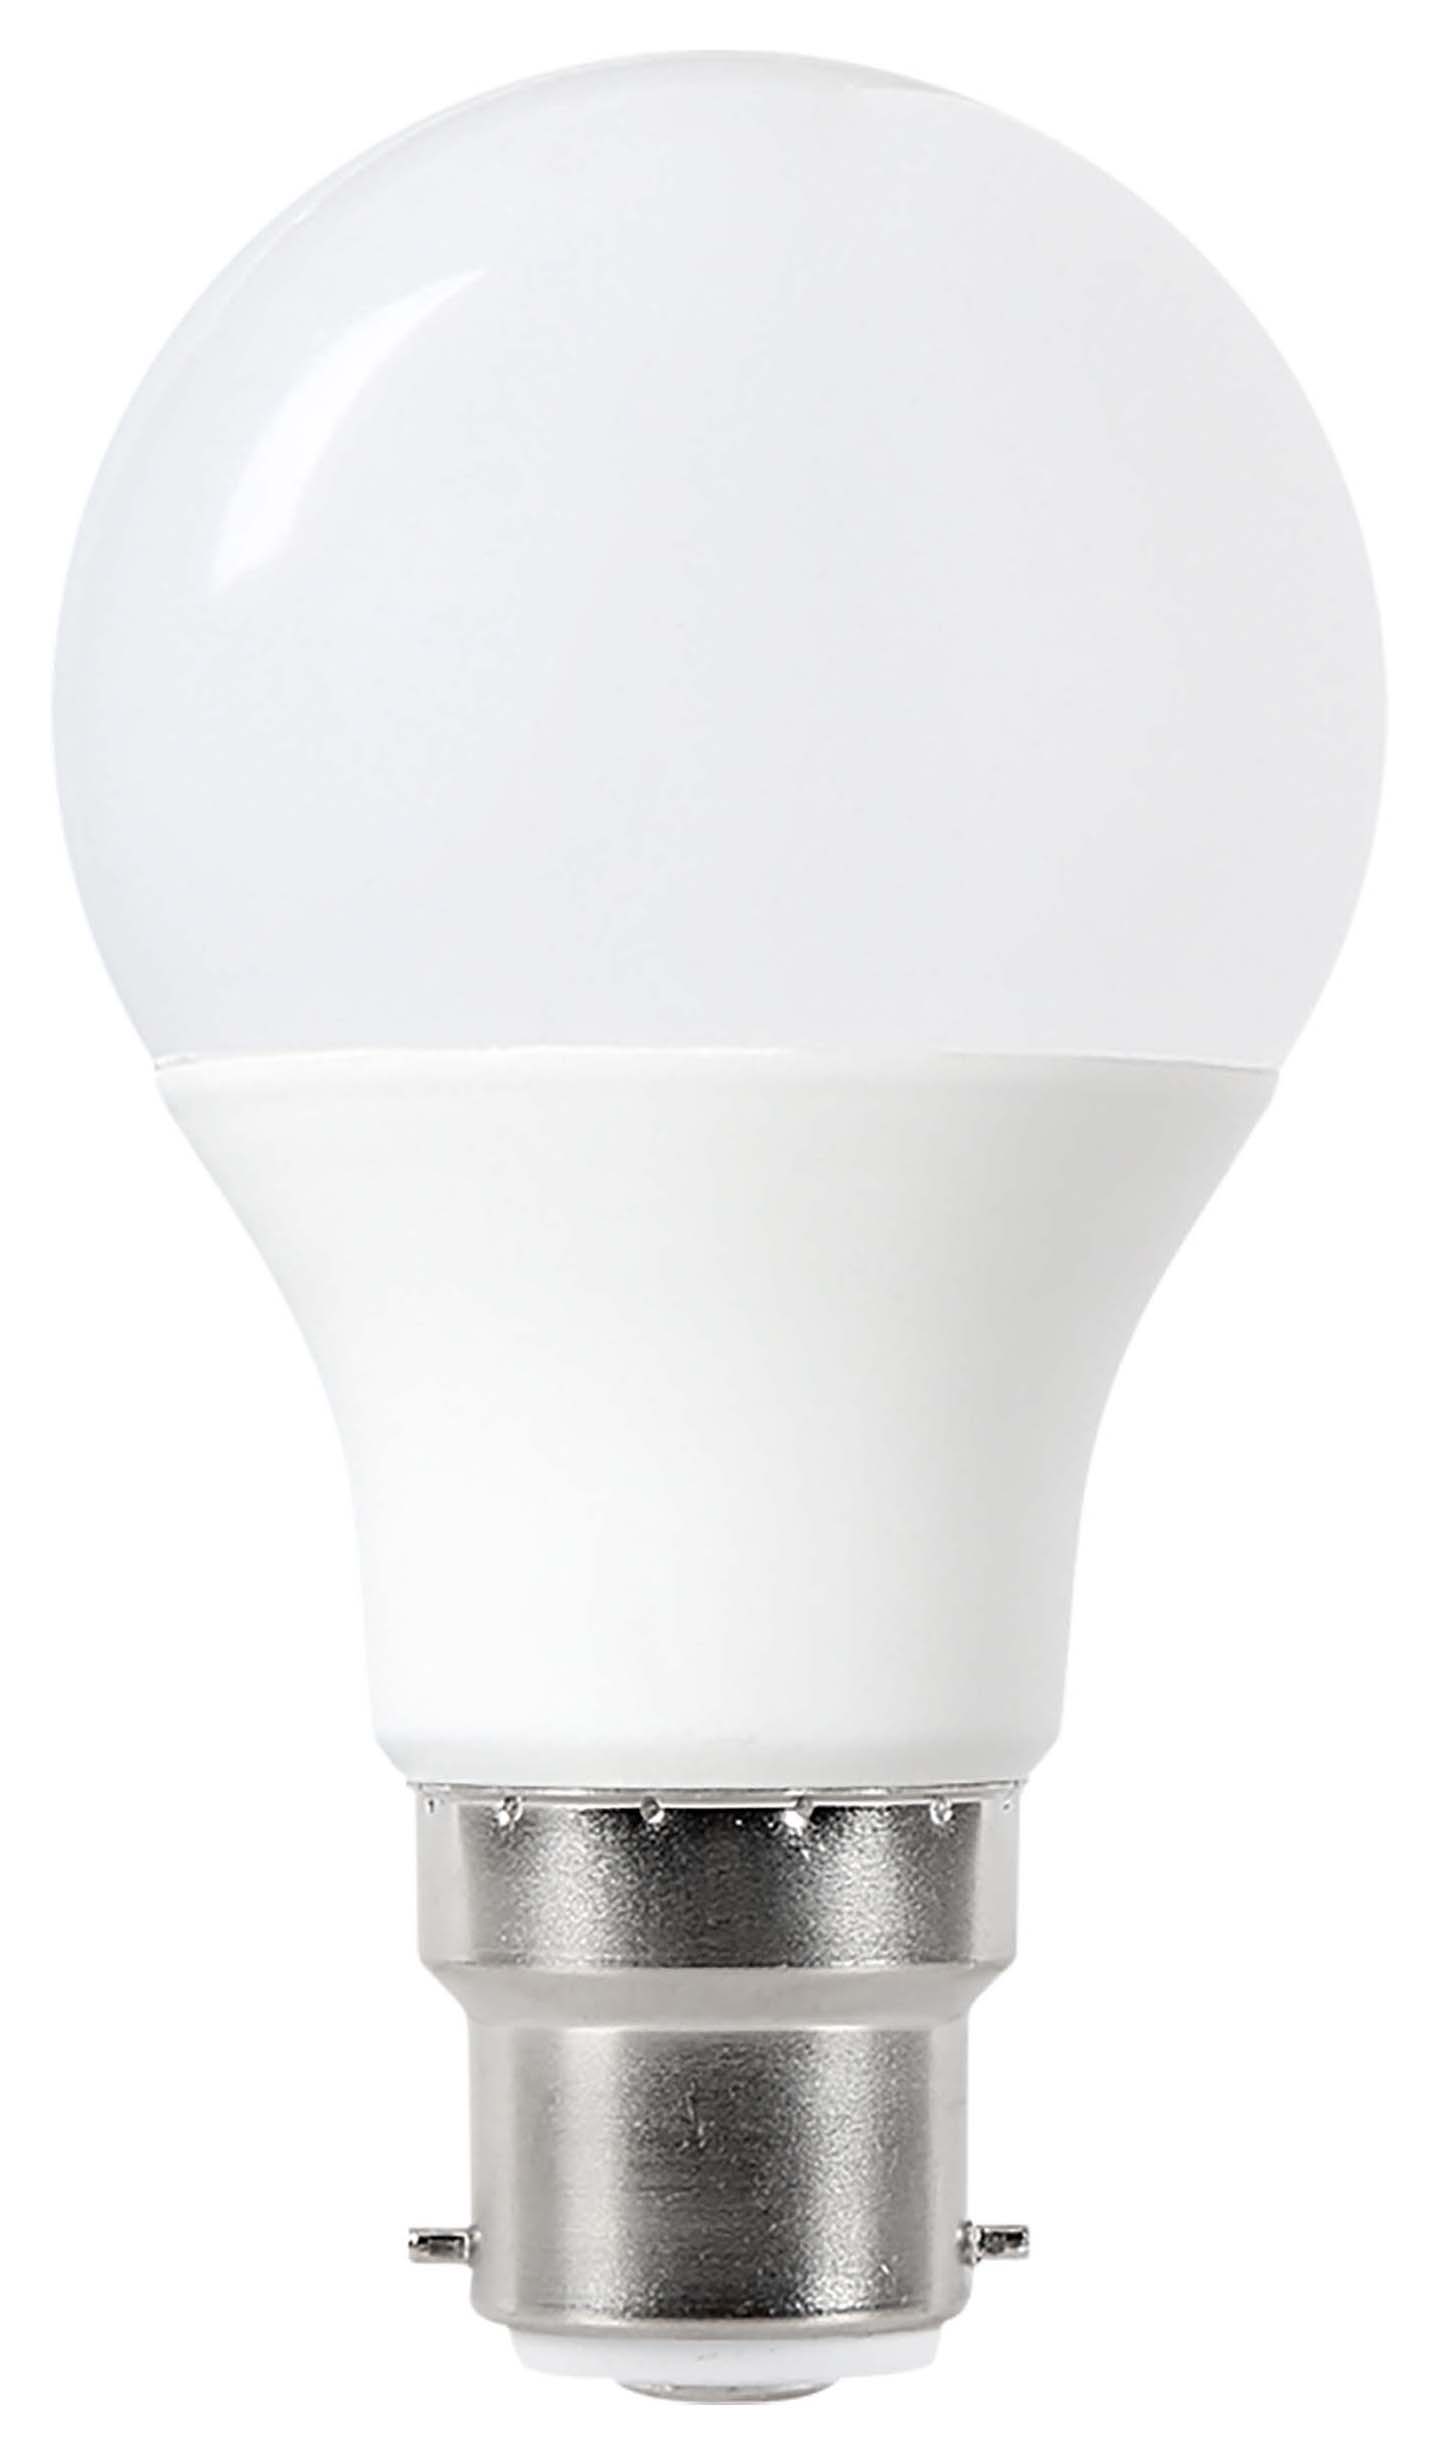 Wickes Non-Dimmable GLS Opal LED B22 8.8W Cool White Light Bulb